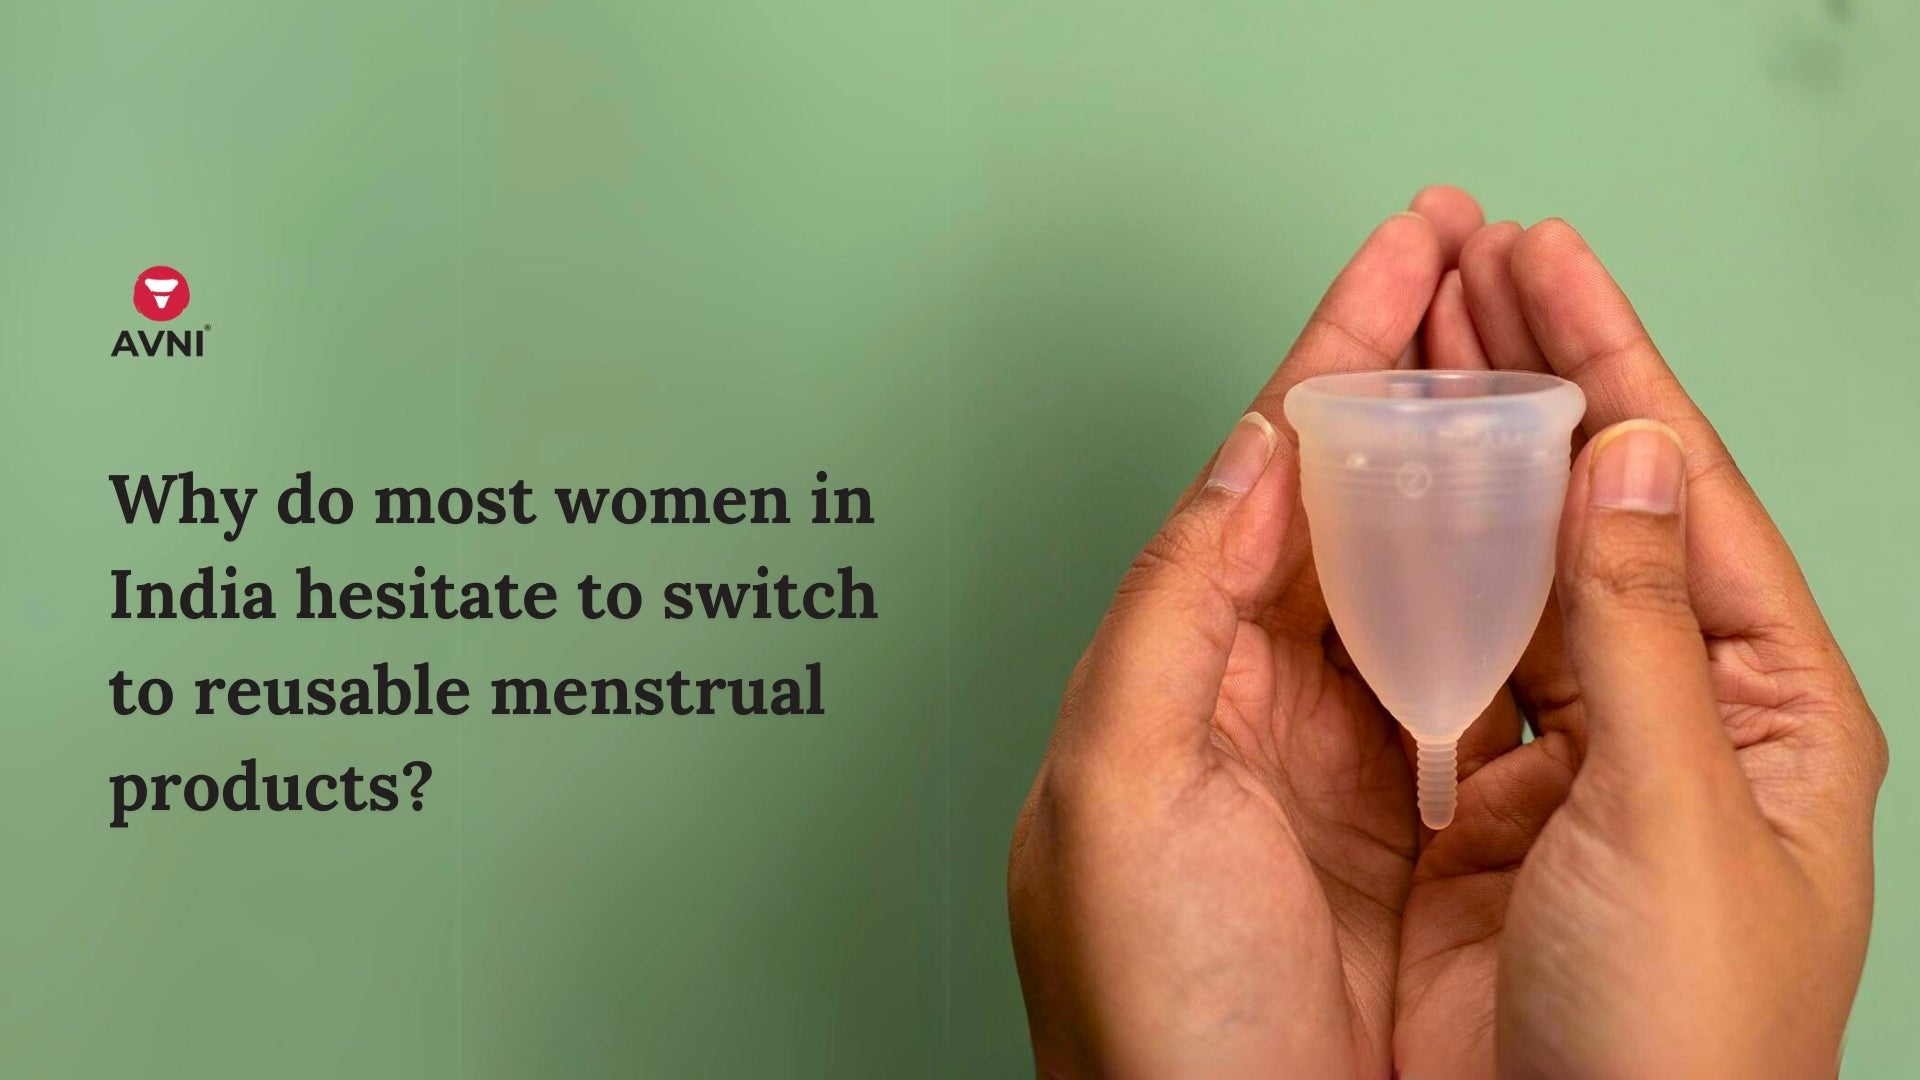 http://www.myavni.com/cdn/shop/articles/Why_do_most_women_in_India_hesitate_to_switch_to_reusable_menstrual_products.jpg?v=1704308793&width=2048